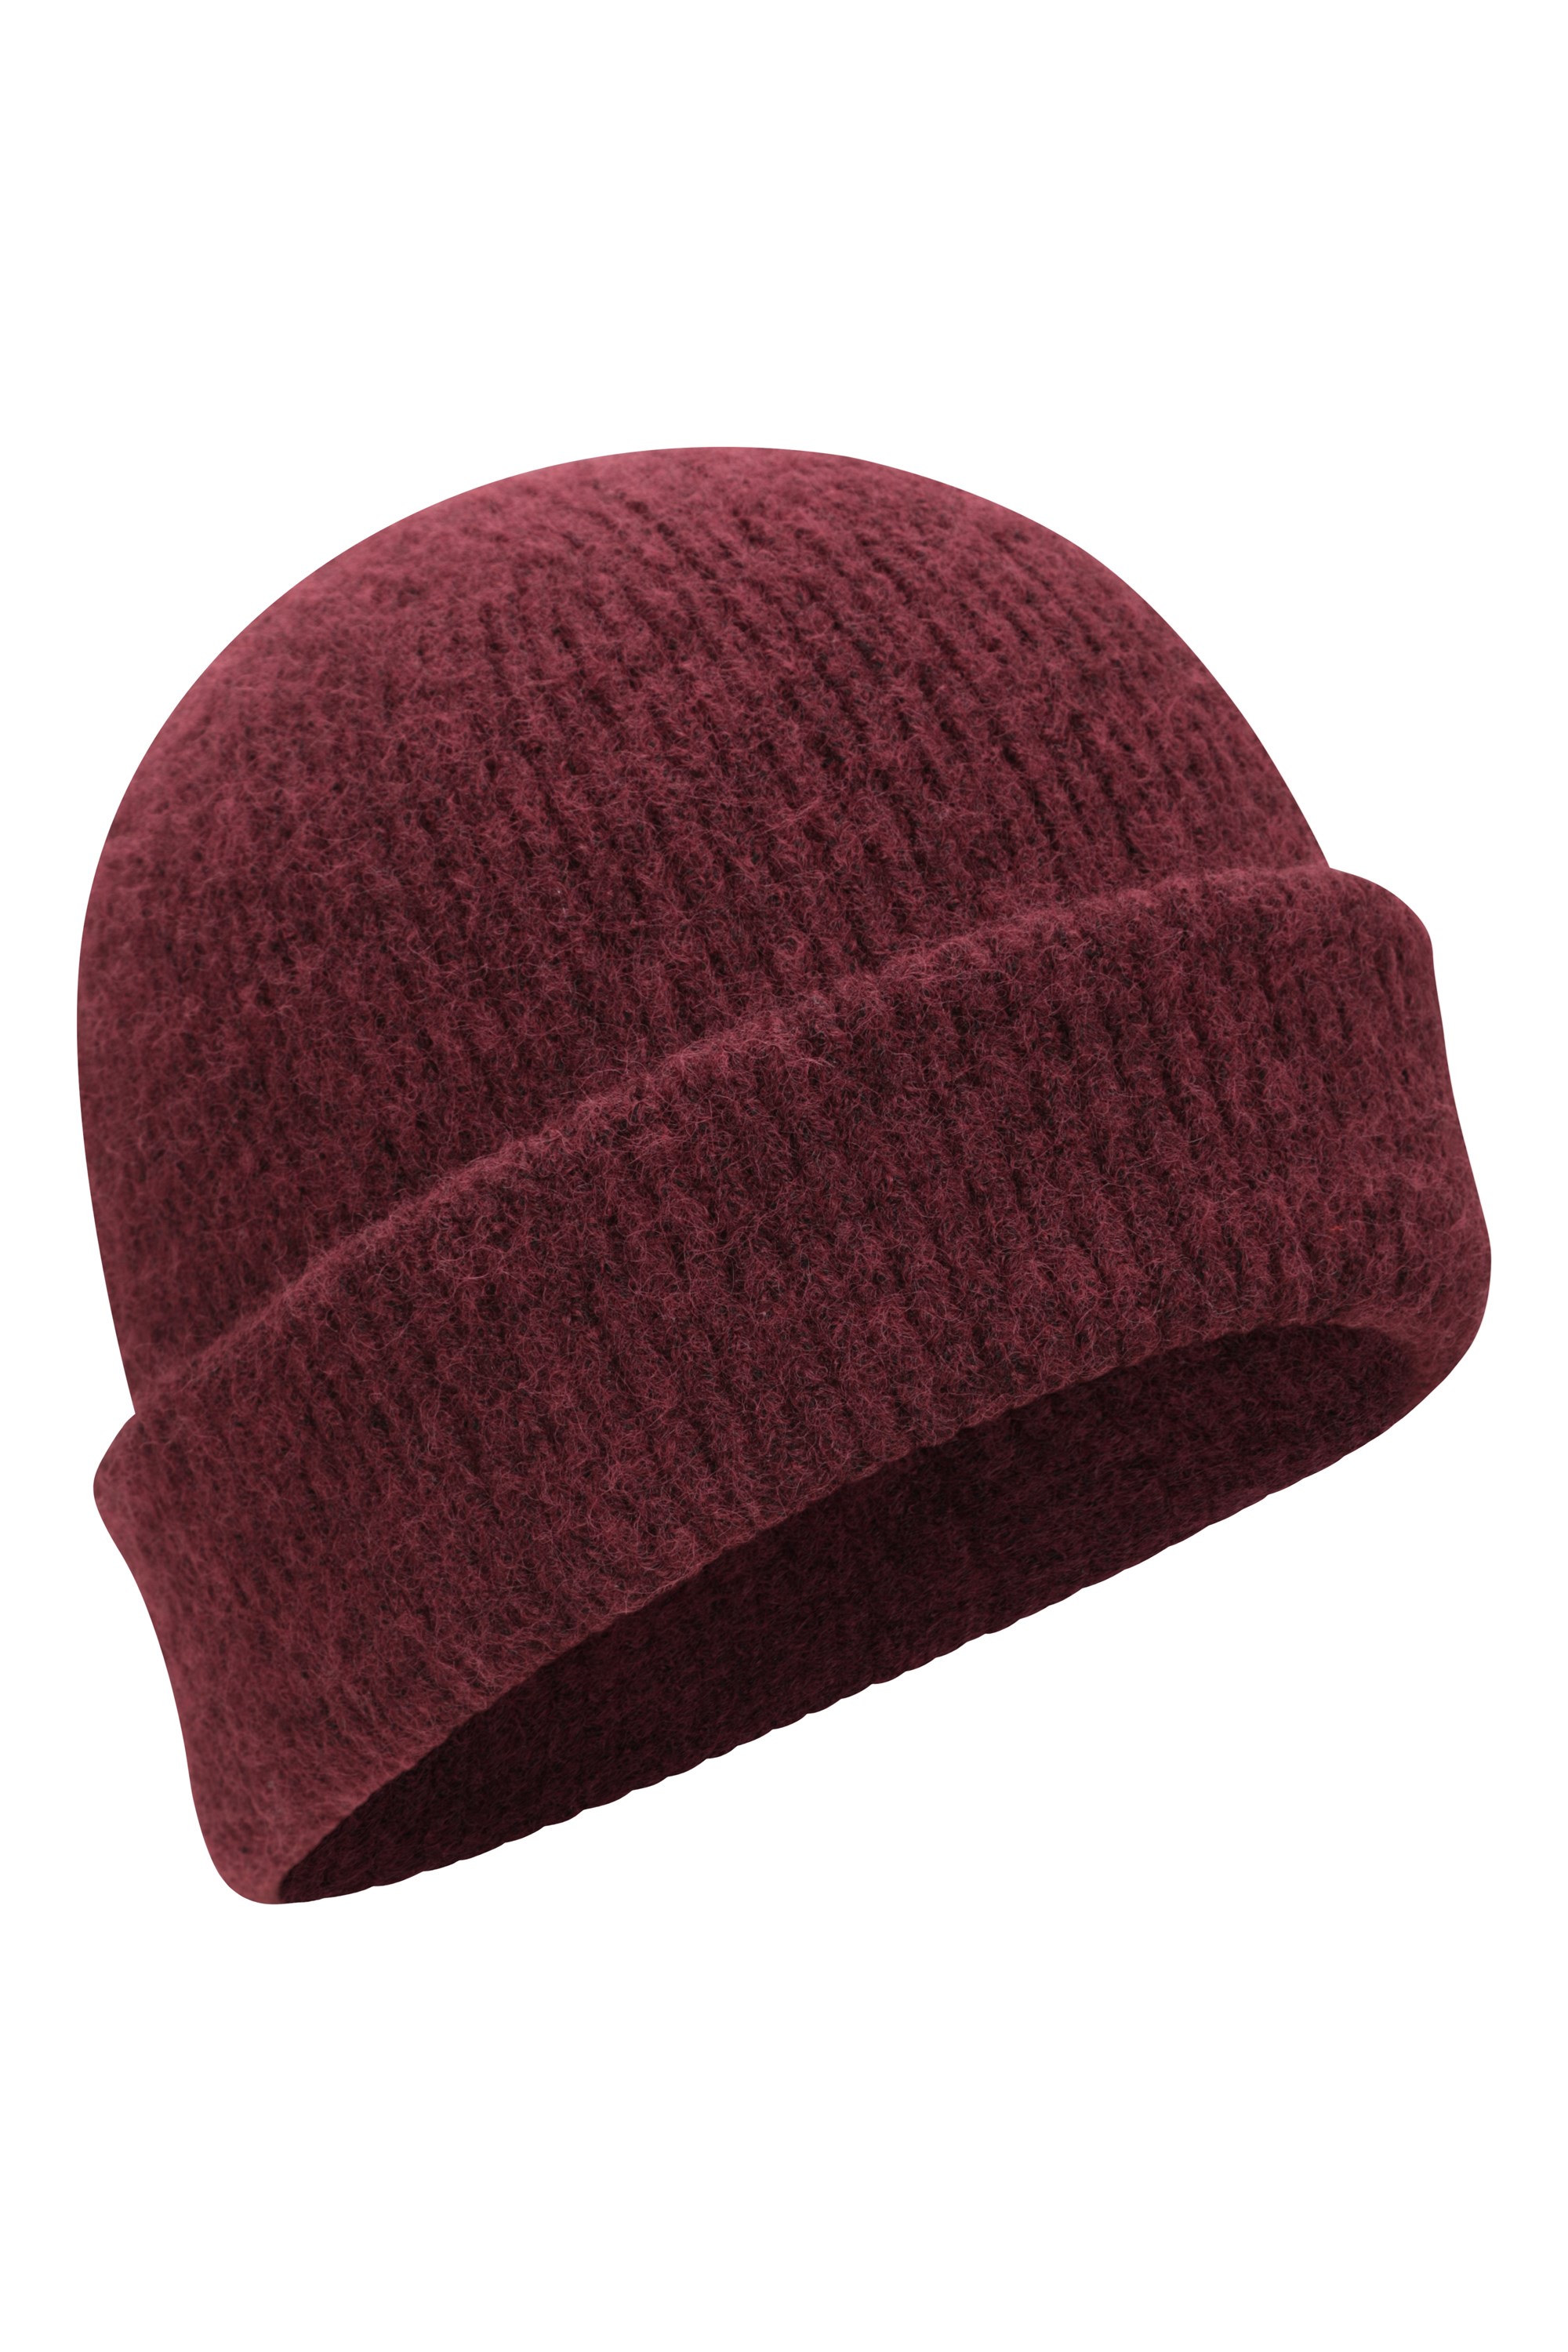 Mountain Warehouse Men Heavy Cable Beanie Winter Hat 